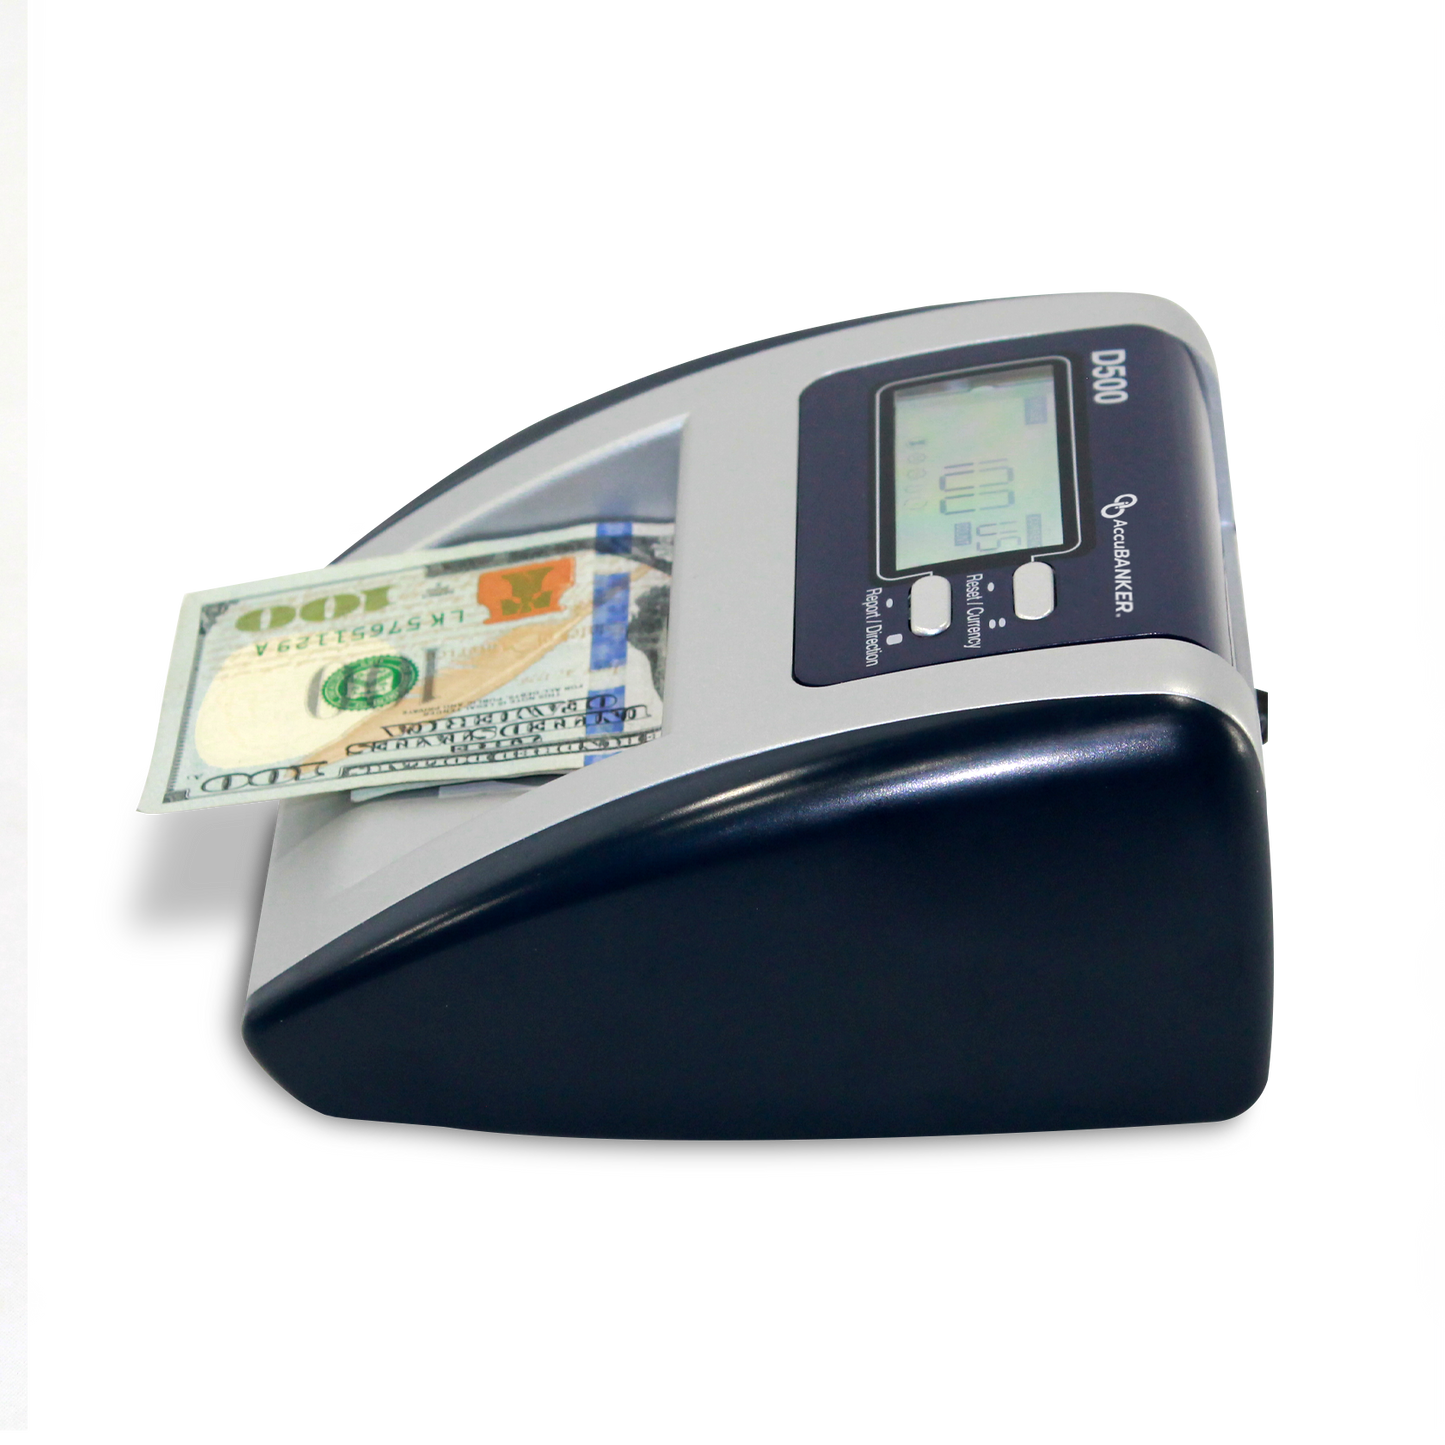 D500 Automatic Counterfeit Bill and Value Detector